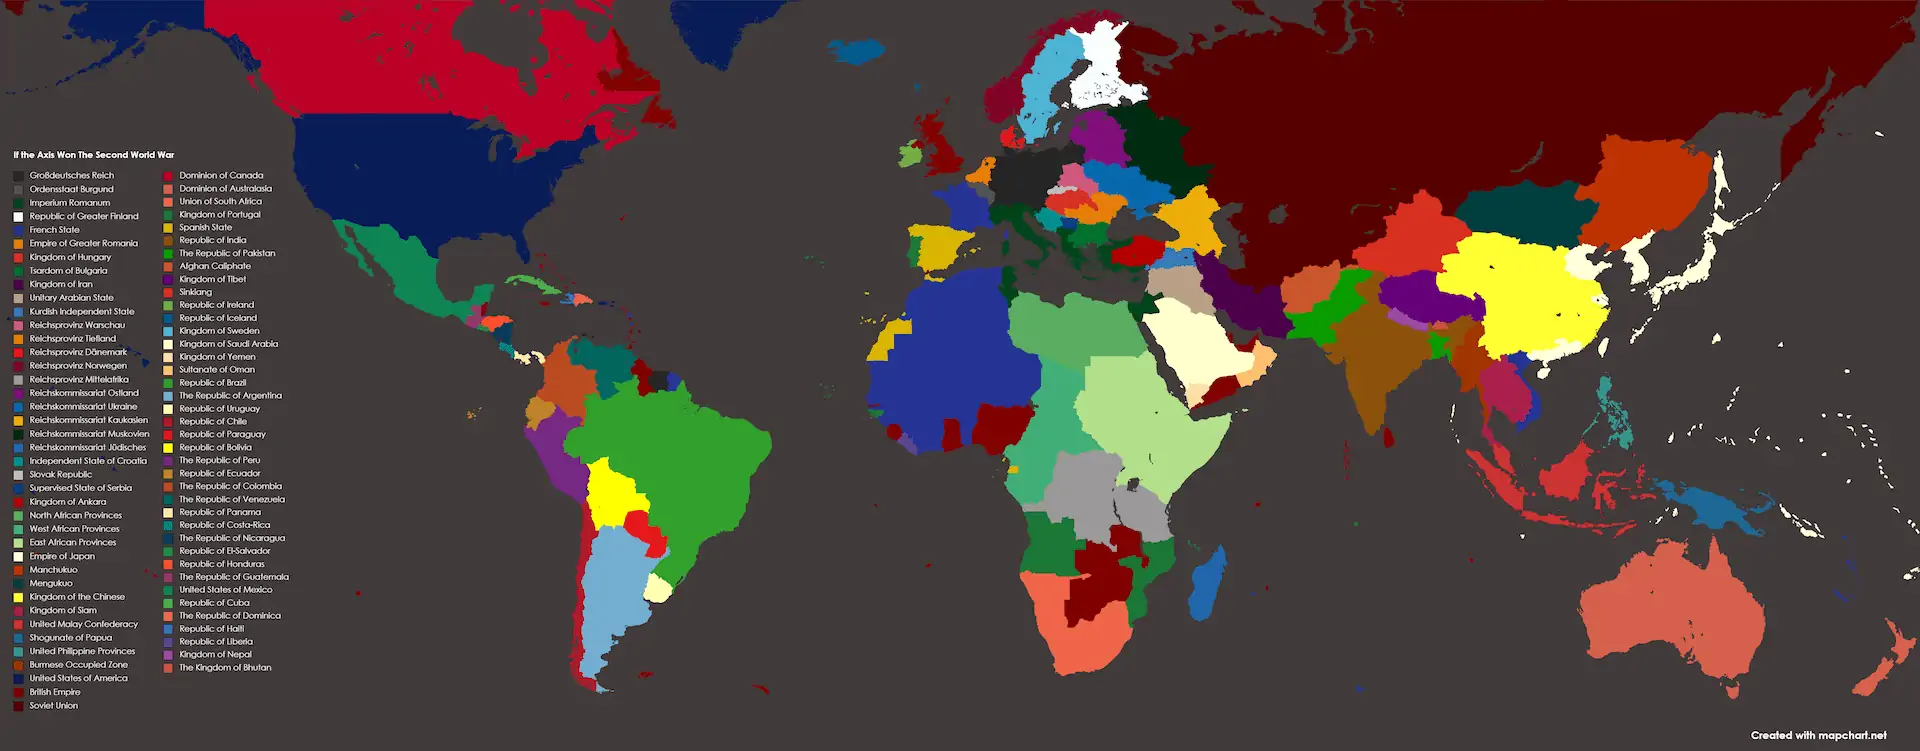 Outline of the Post-War New World Map - Alternate Timelines Group